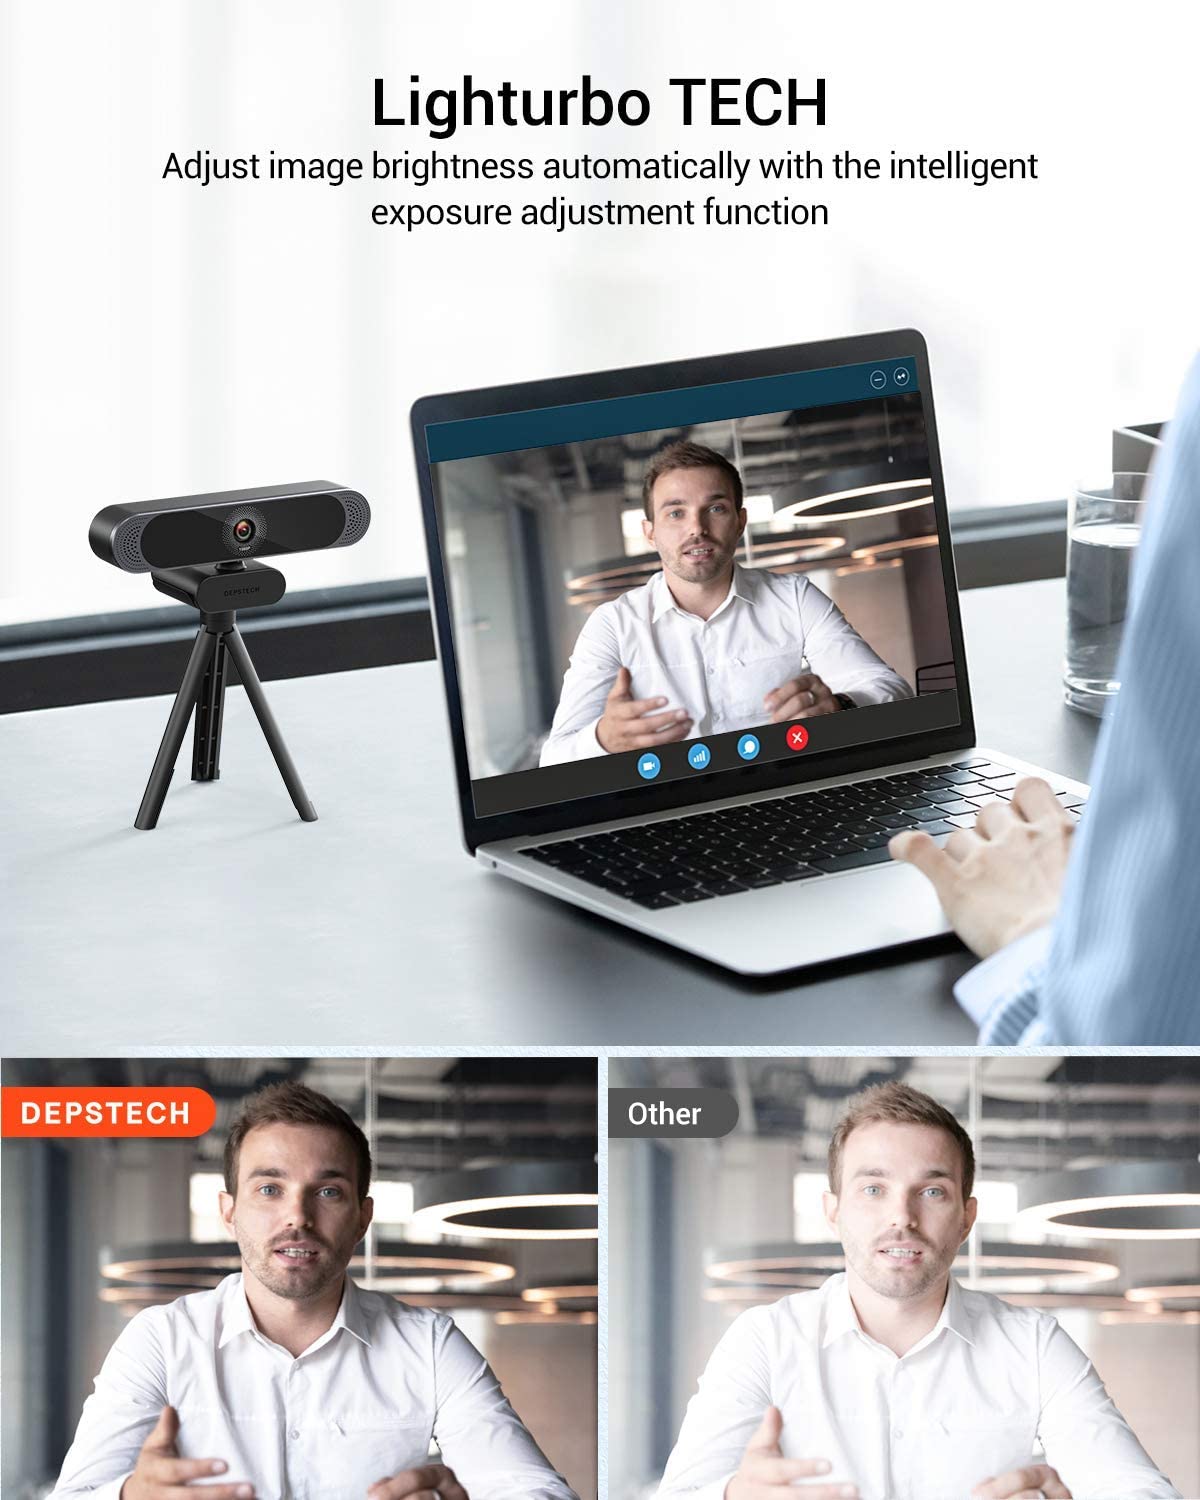 1080p HD Webcam with Microphone Privacy Cover and Tripod